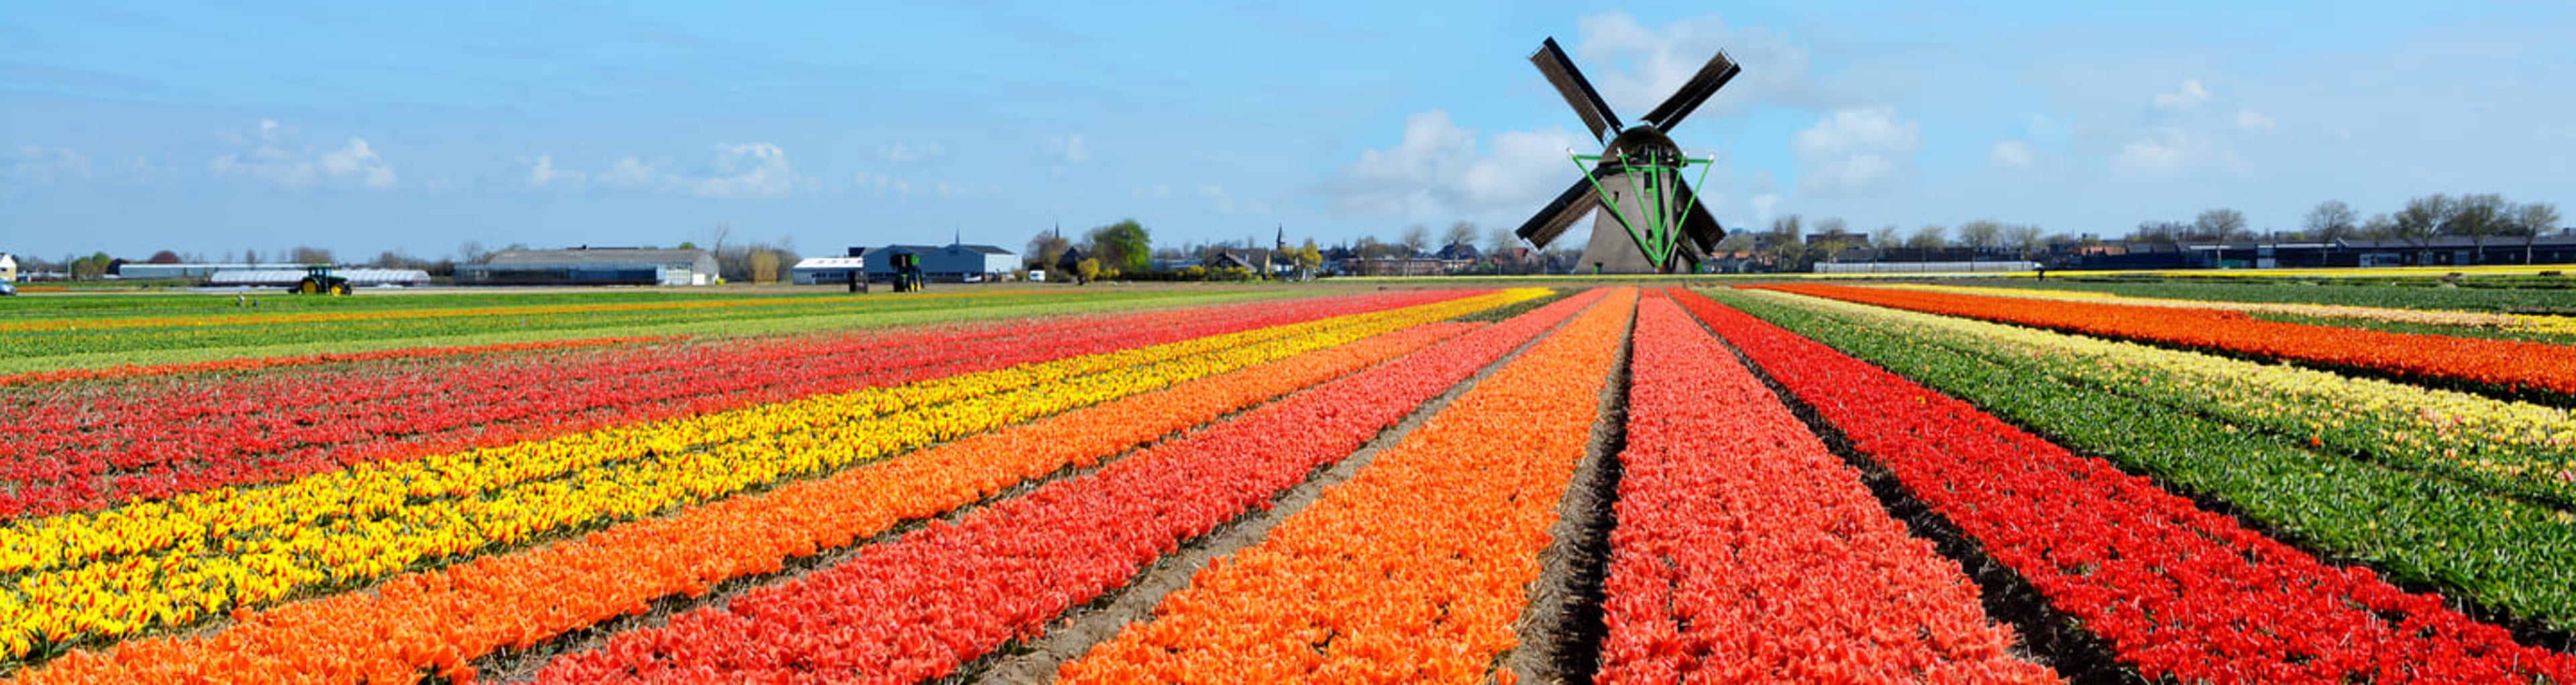 Windmill and colorful bulb fields in the Netherlands